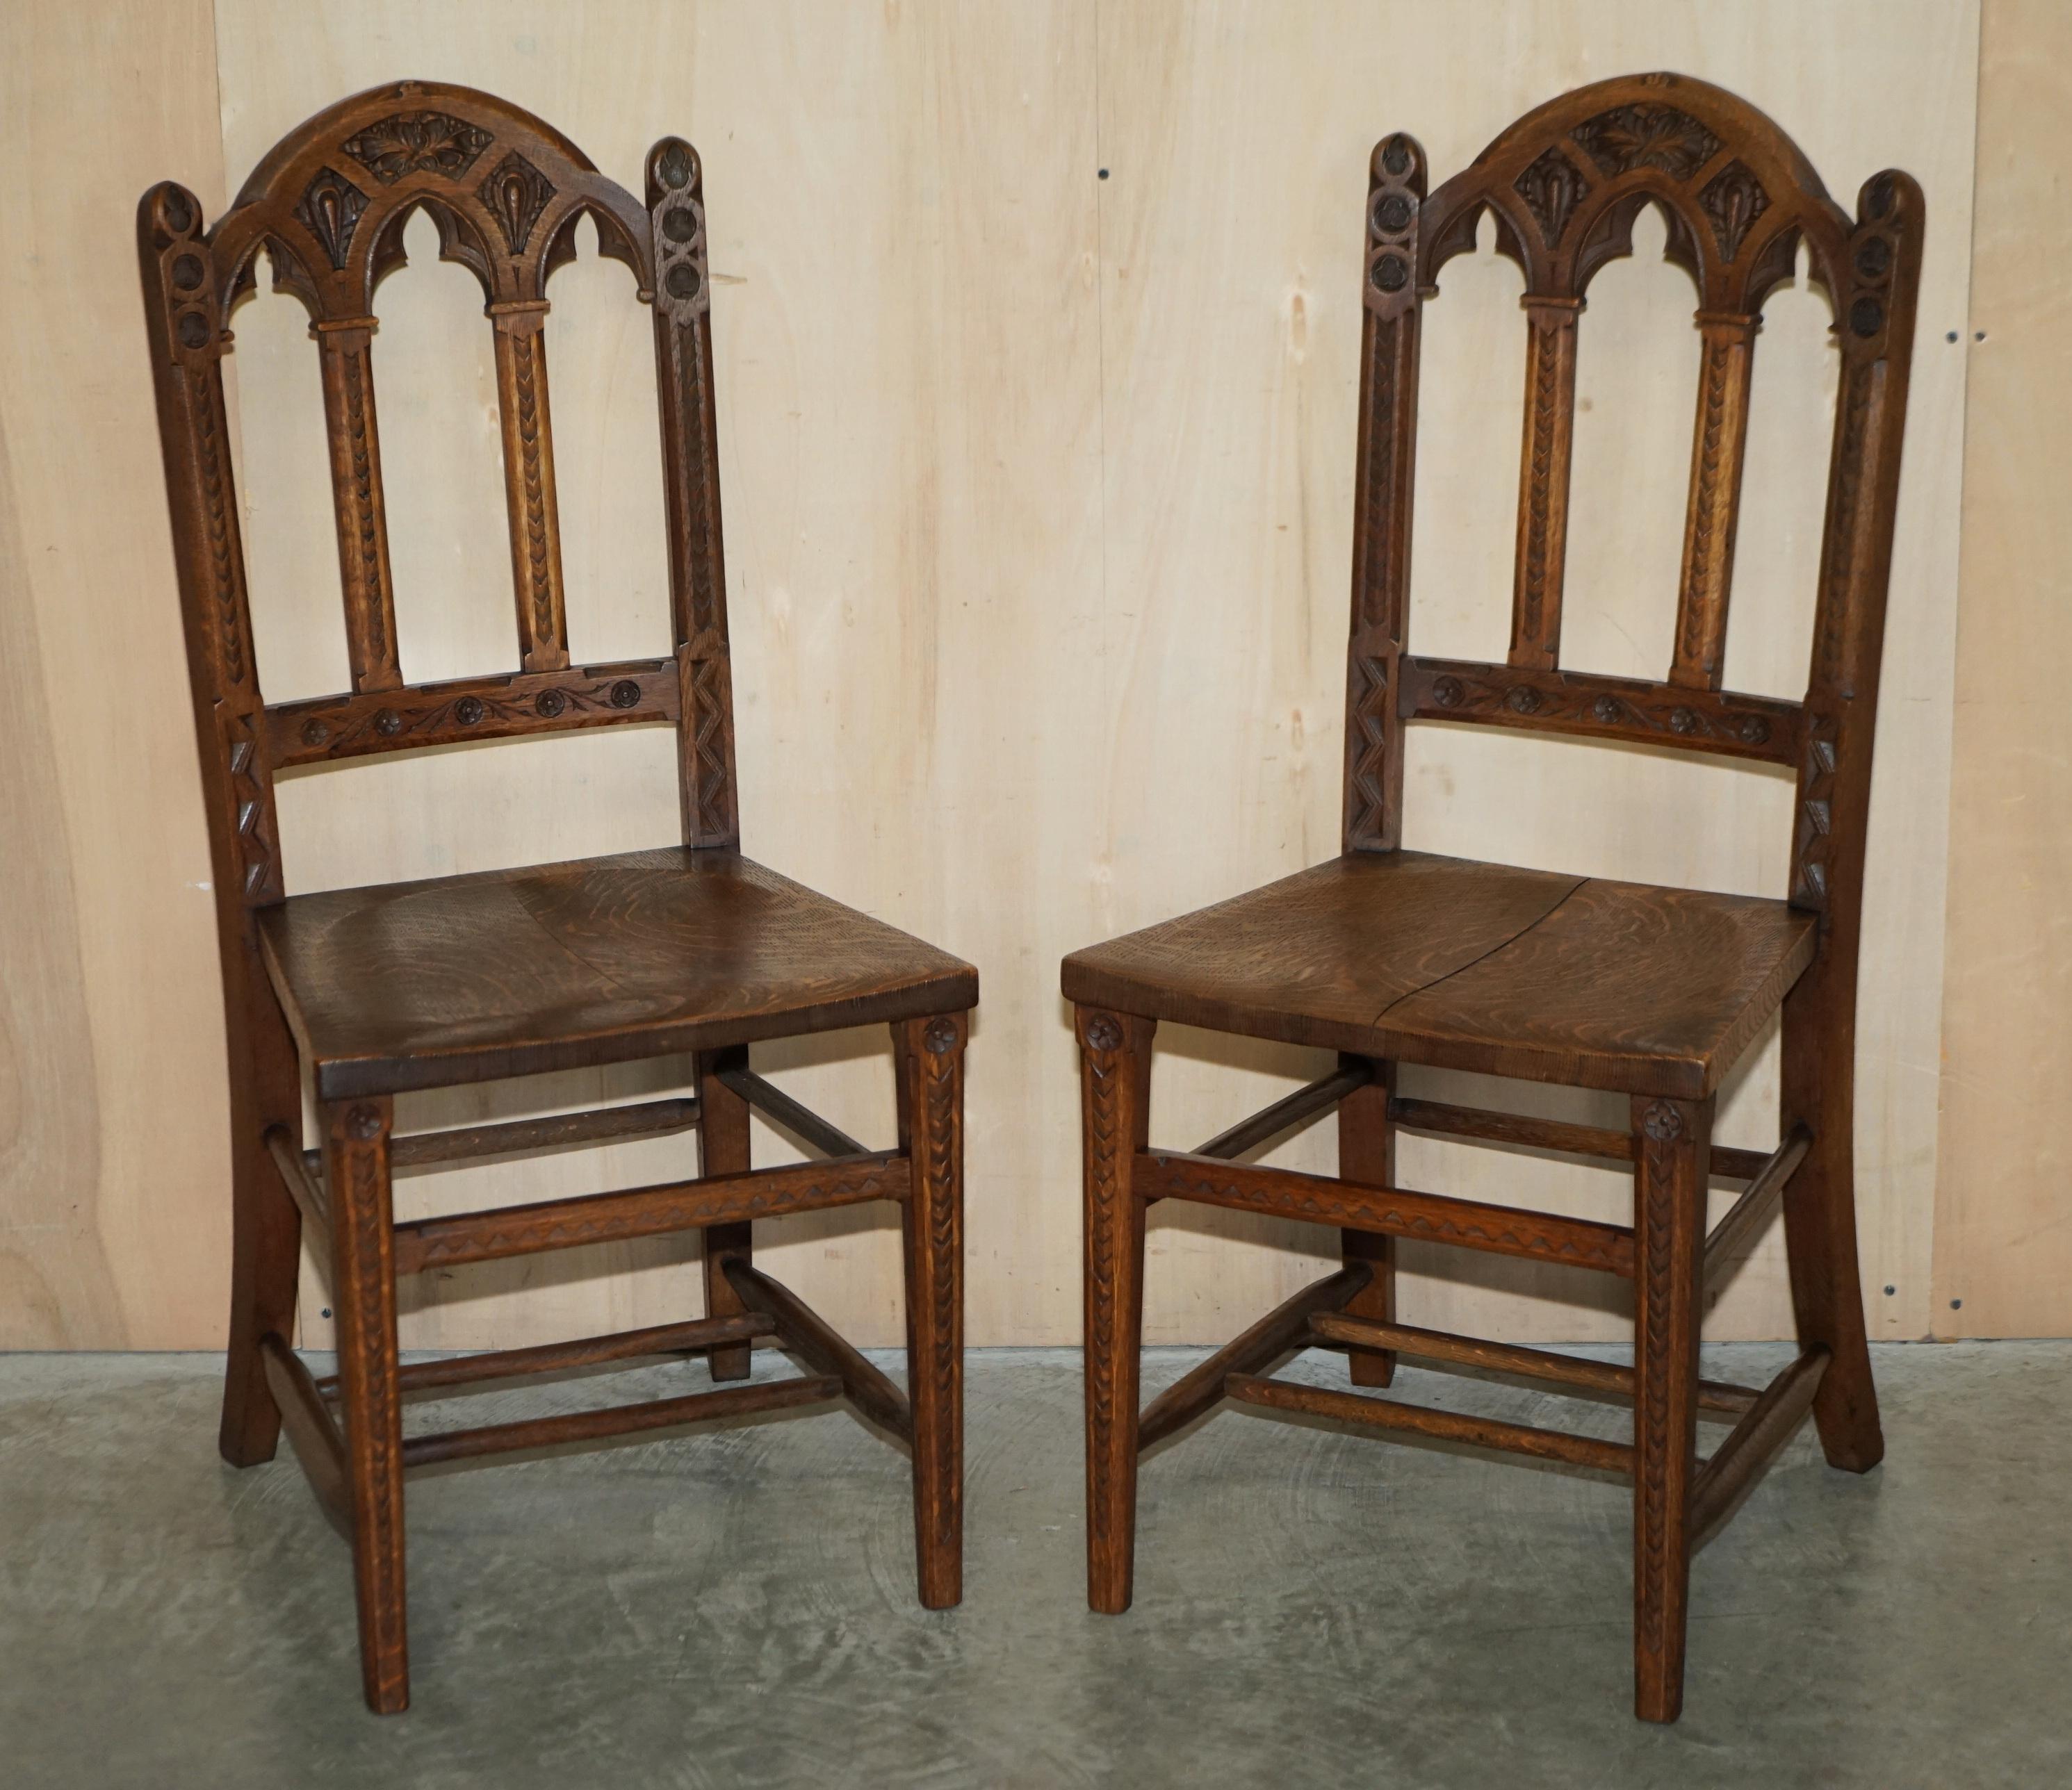 Royal House Antiques

Royal House Antiques is delighted to offer for sale this lovely suite of six original Gothic Revival hand carved English oak dining chairs.

Please note the delivery fee listed is just a guide, it covers within the M25 only for